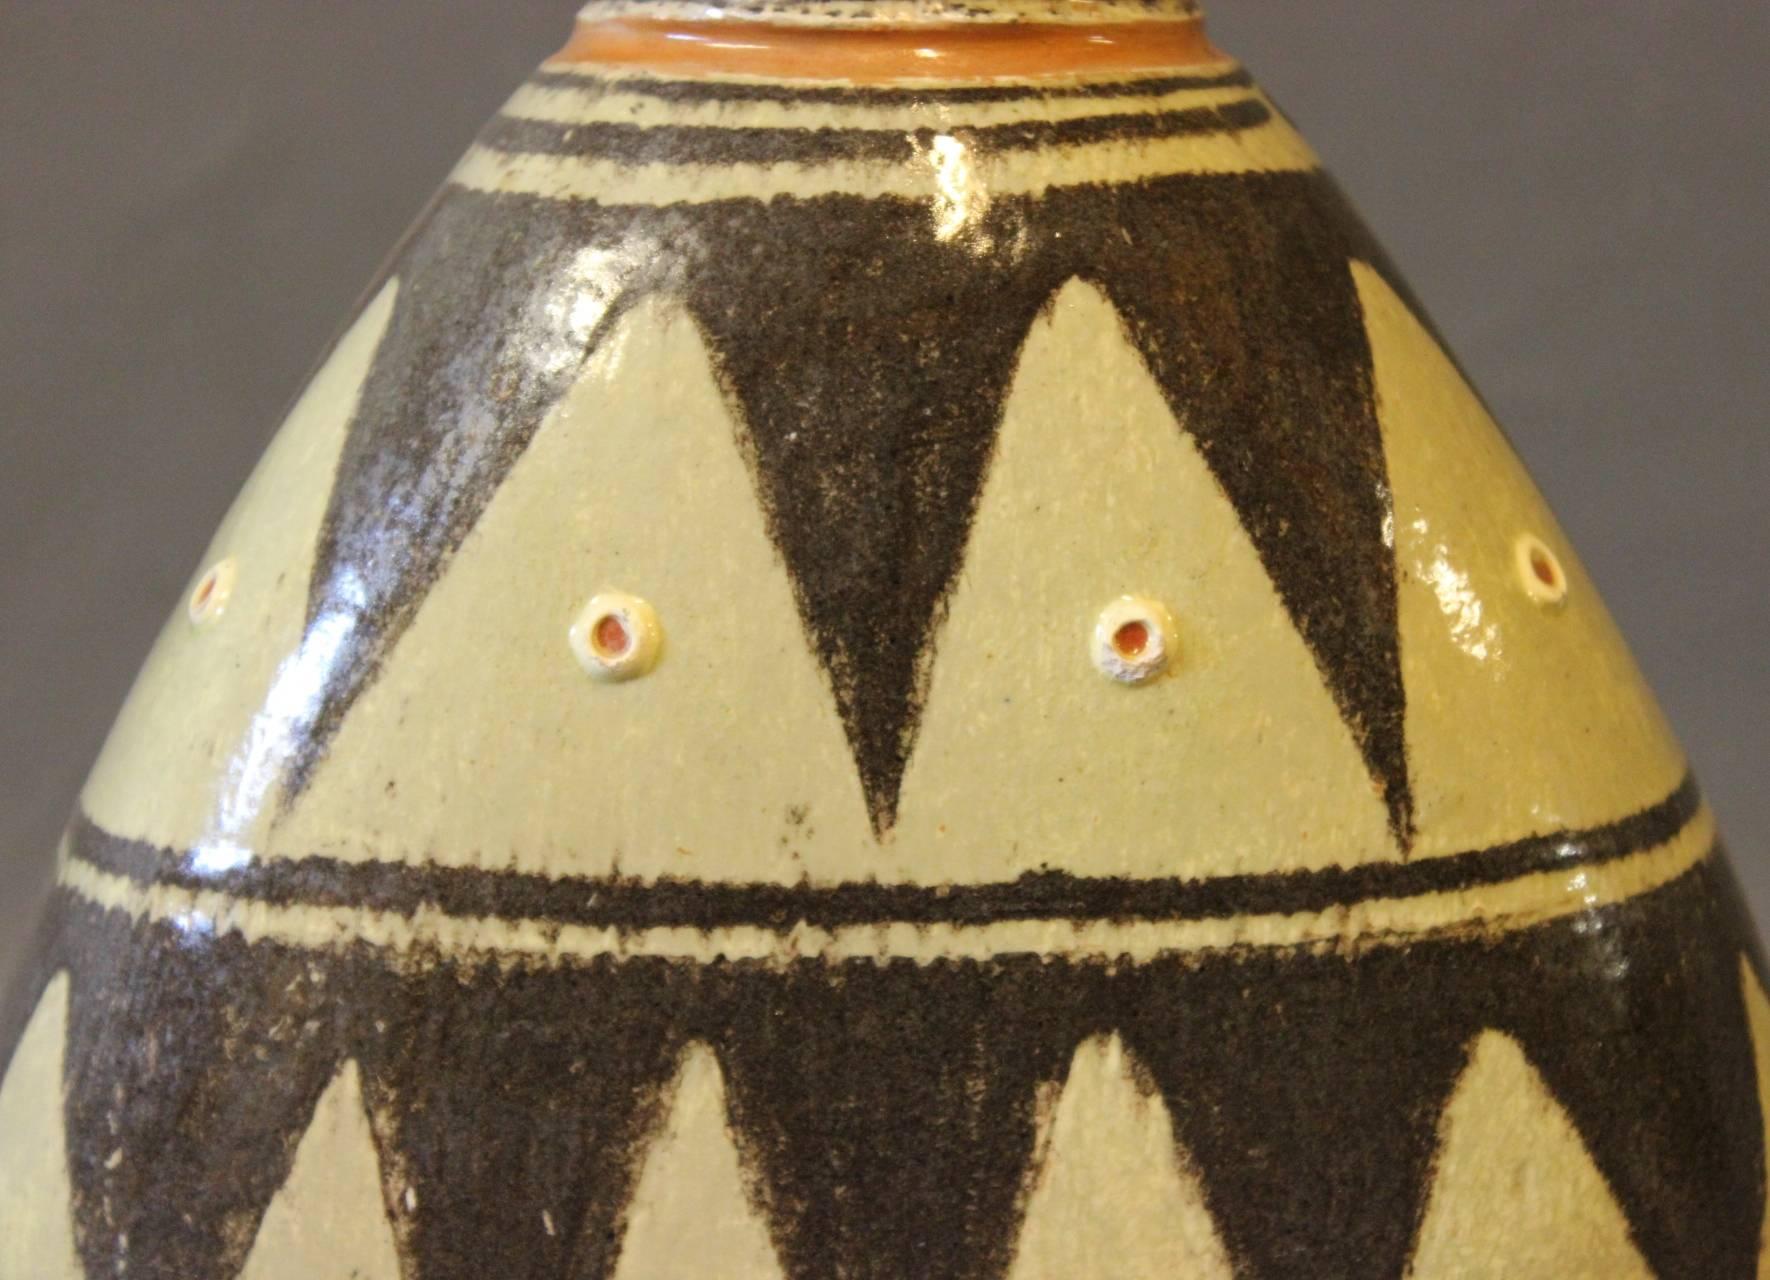 Glazed Vase in Edged Pattern in Brown and Light Colours, Danish Design, 1960s